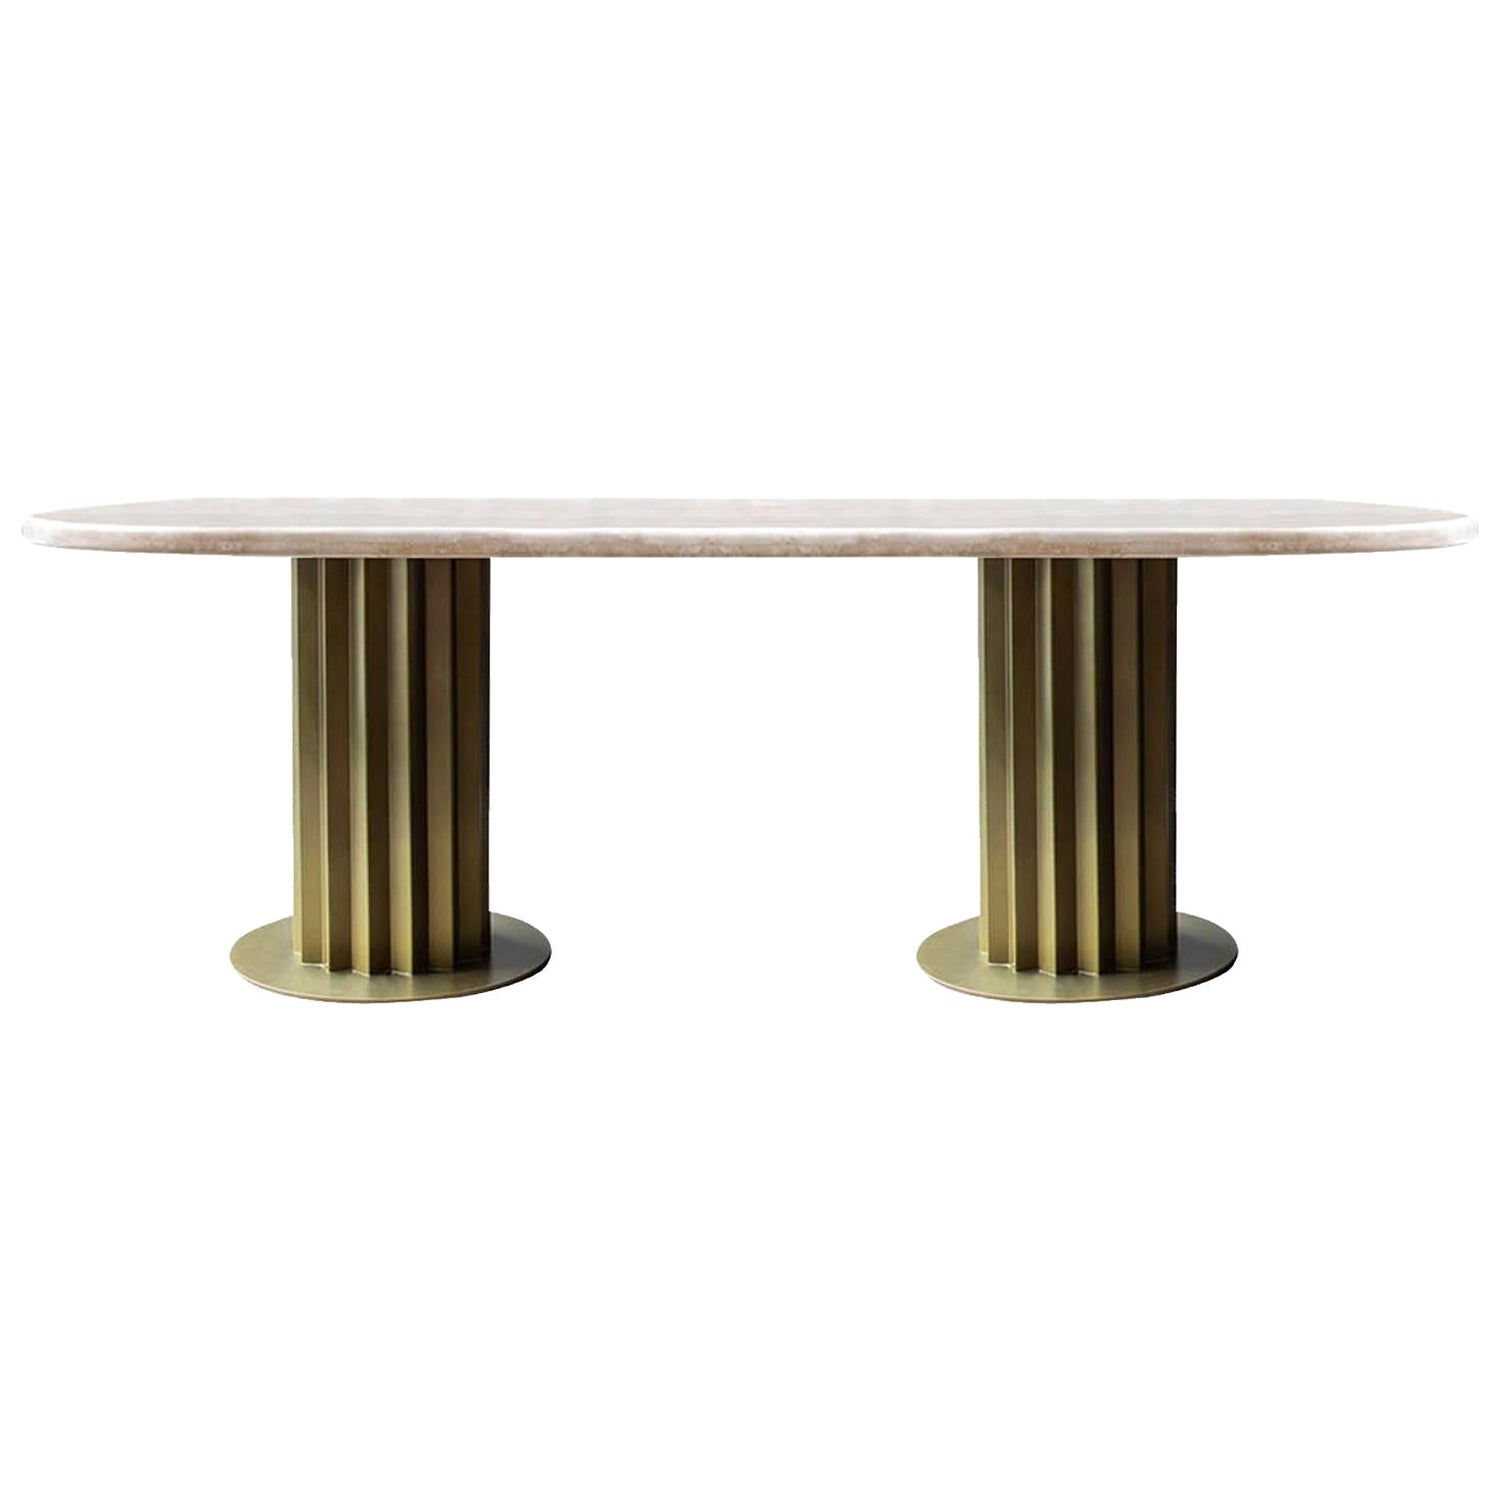 Recalled Brass Table by Lagu